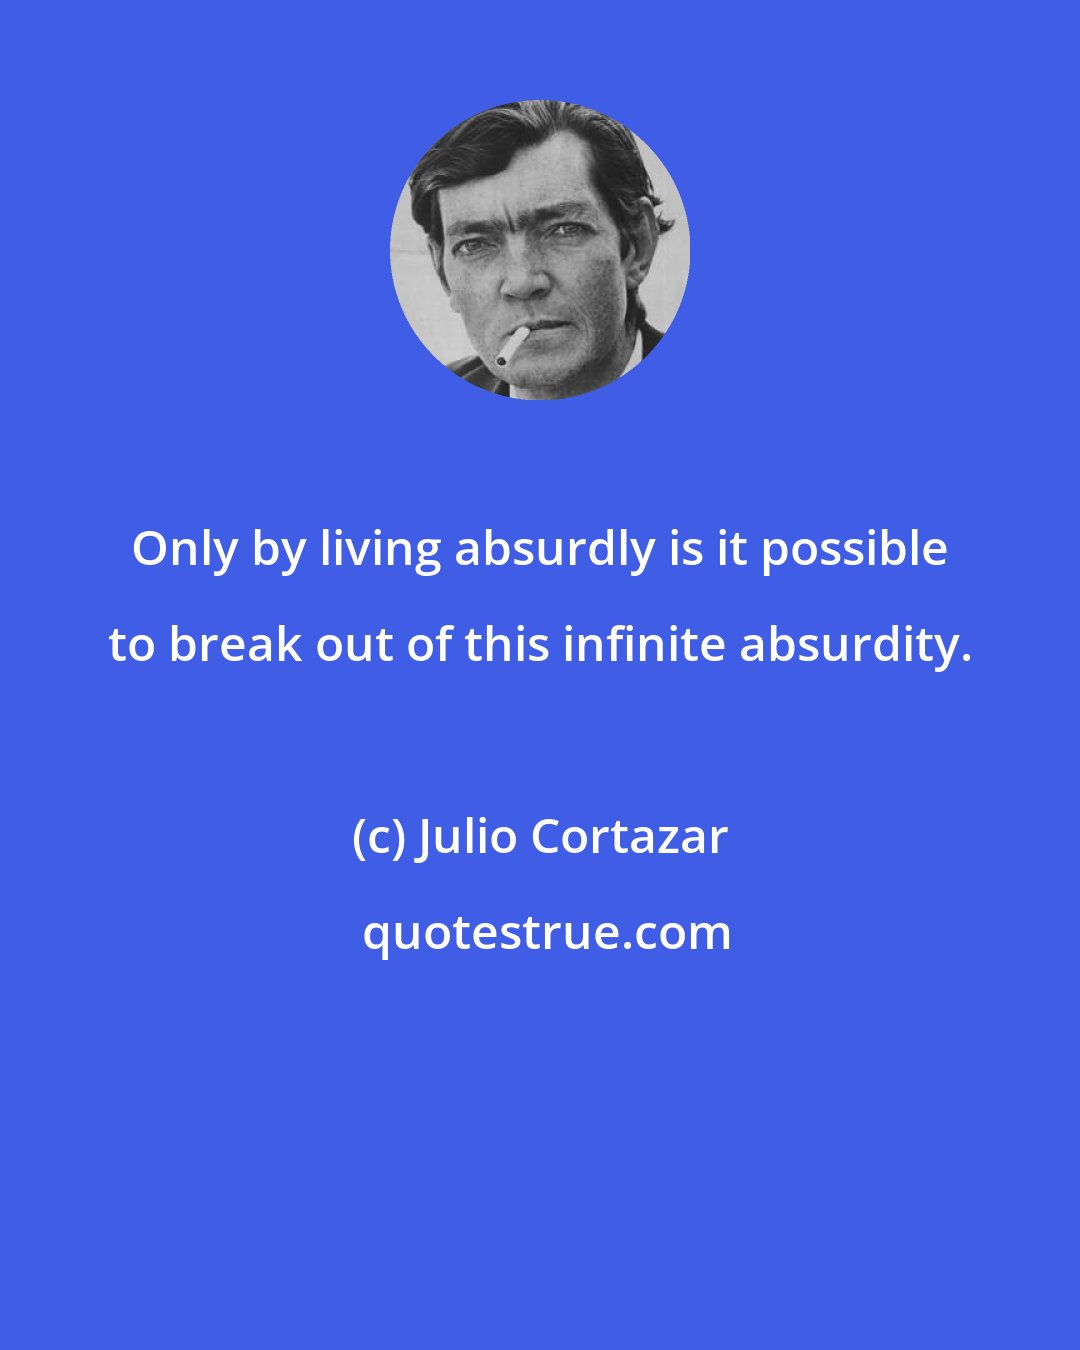 Julio Cortazar: Only by living absurdly is it possible to break out of this infinite absurdity.